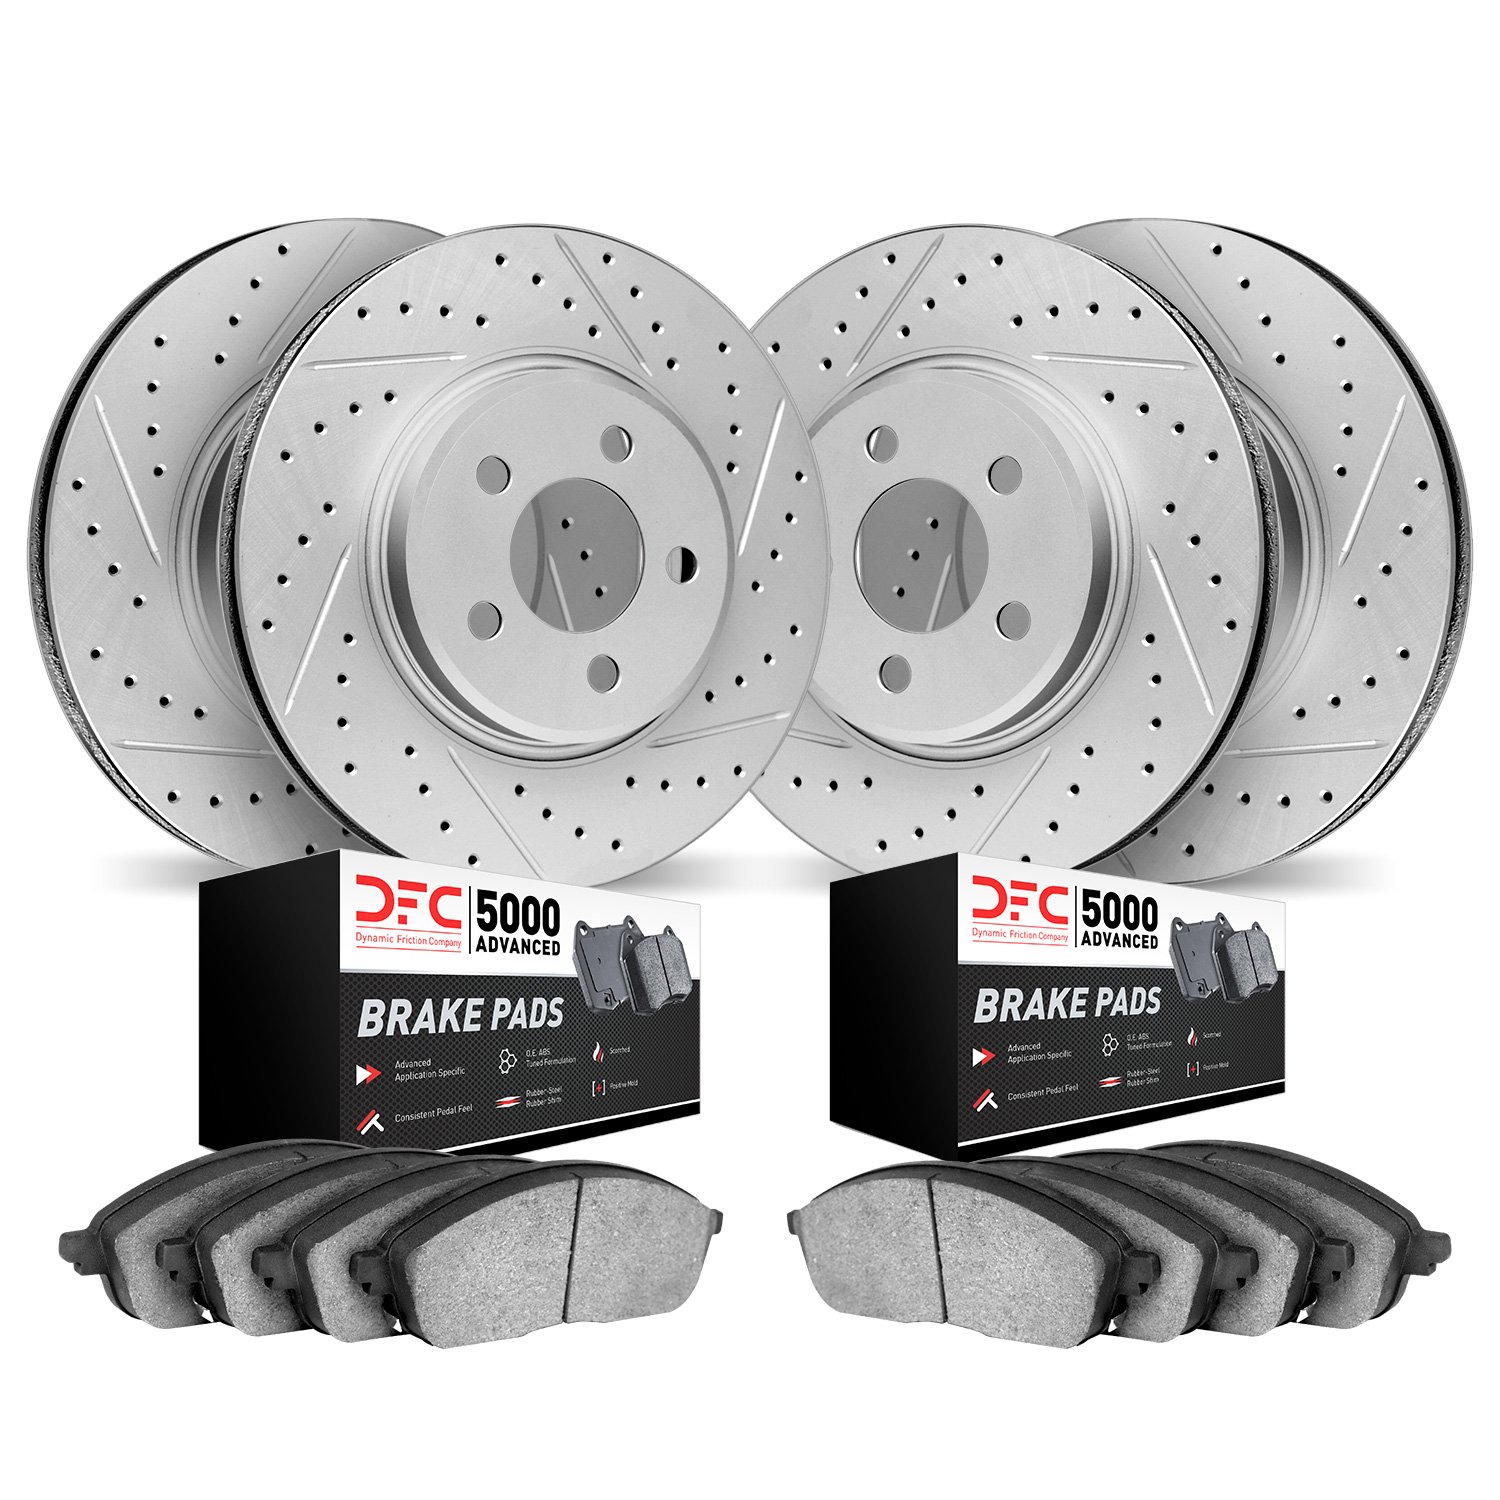 2504-46019 Geoperformance Drilled/Slotted Rotors w/5000 Advanced Brake Pads Kit, 2008-2014 GM, Position: Front and Rear